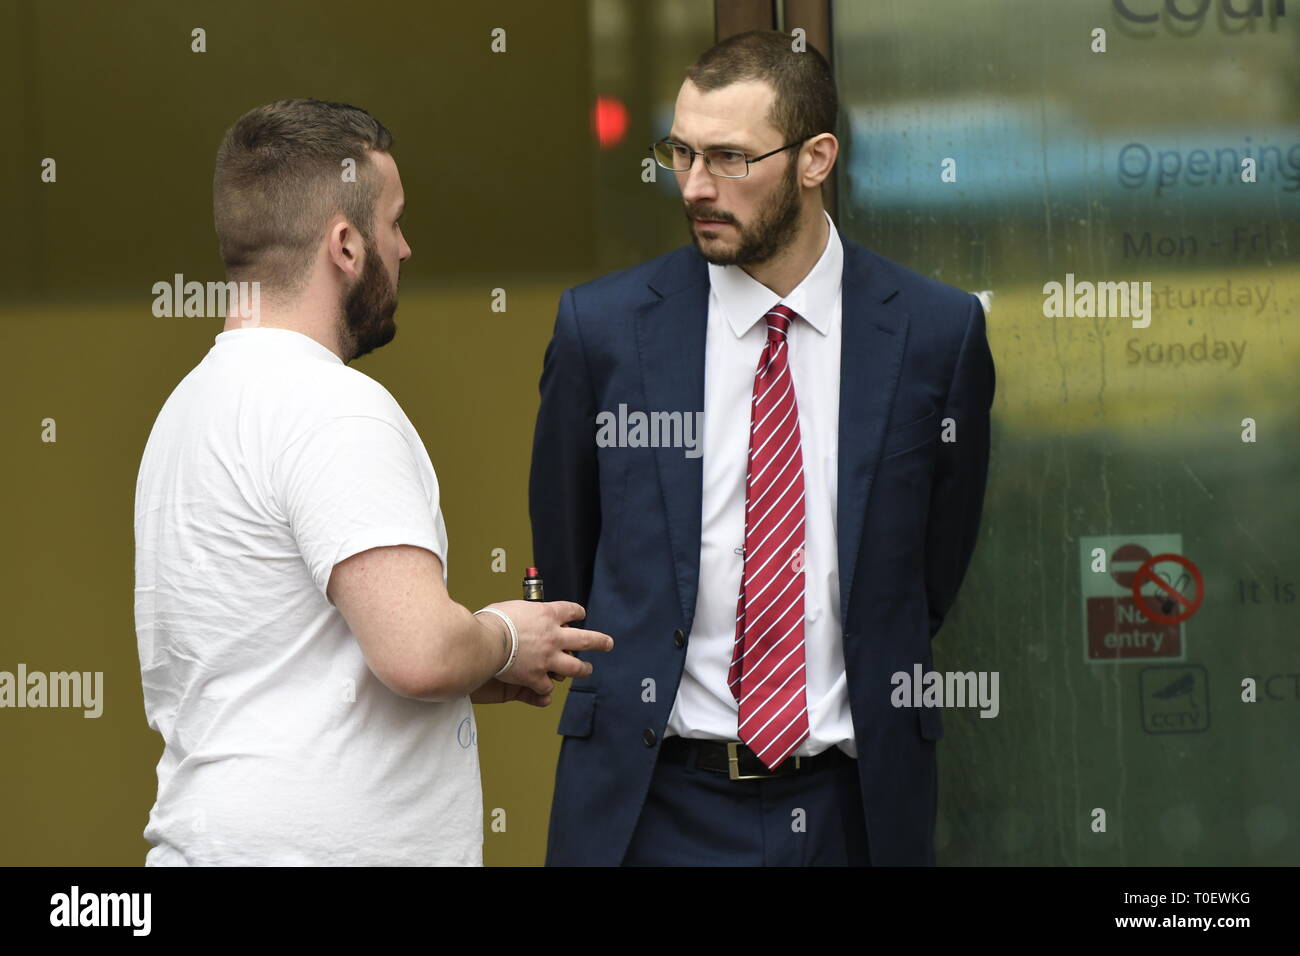 James Goddard (left) seen outside Westminster Magistrates’ Court.  Brexit protester and leading member of the 'Yellow Vest UK' movement James Goddard appeared at the Westminster Magistrates’ Court where he was charged for harassing MP Anna Soubry outside Parliament, and he is also accused of two public order offences against a police officer. Few supporters of Goddard where present outside Westminster Magistrates’ Court. Stock Photo